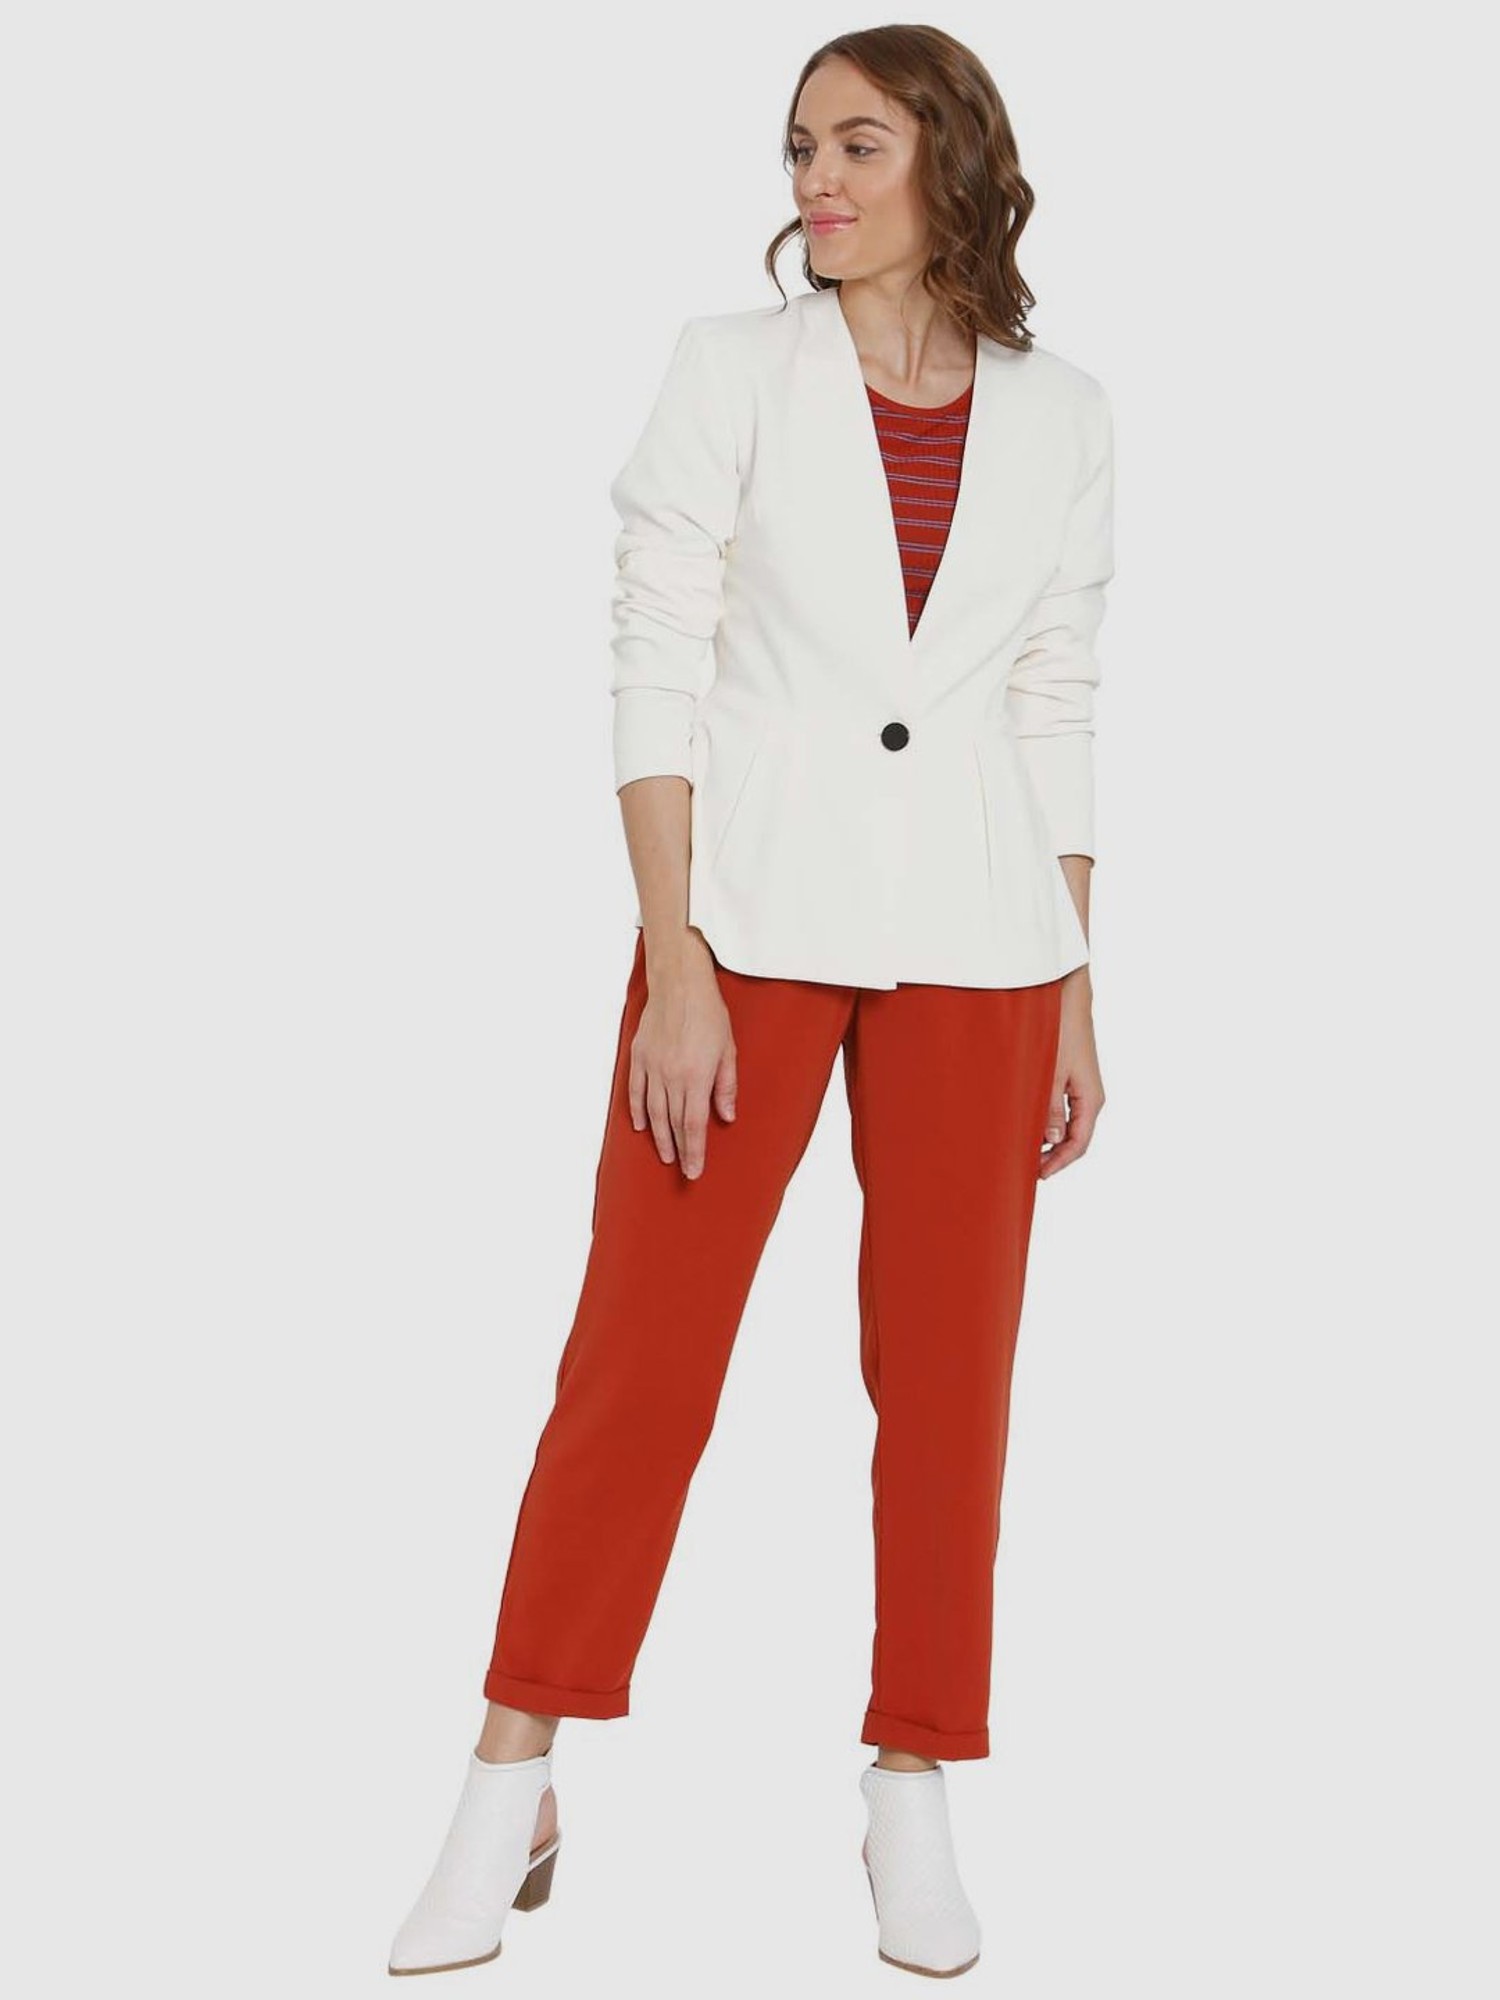 Fashion Casual Ladies White Blazer Women Business Suits Pant and Jacket  Sets Work Wear Office Uniform Styles OL